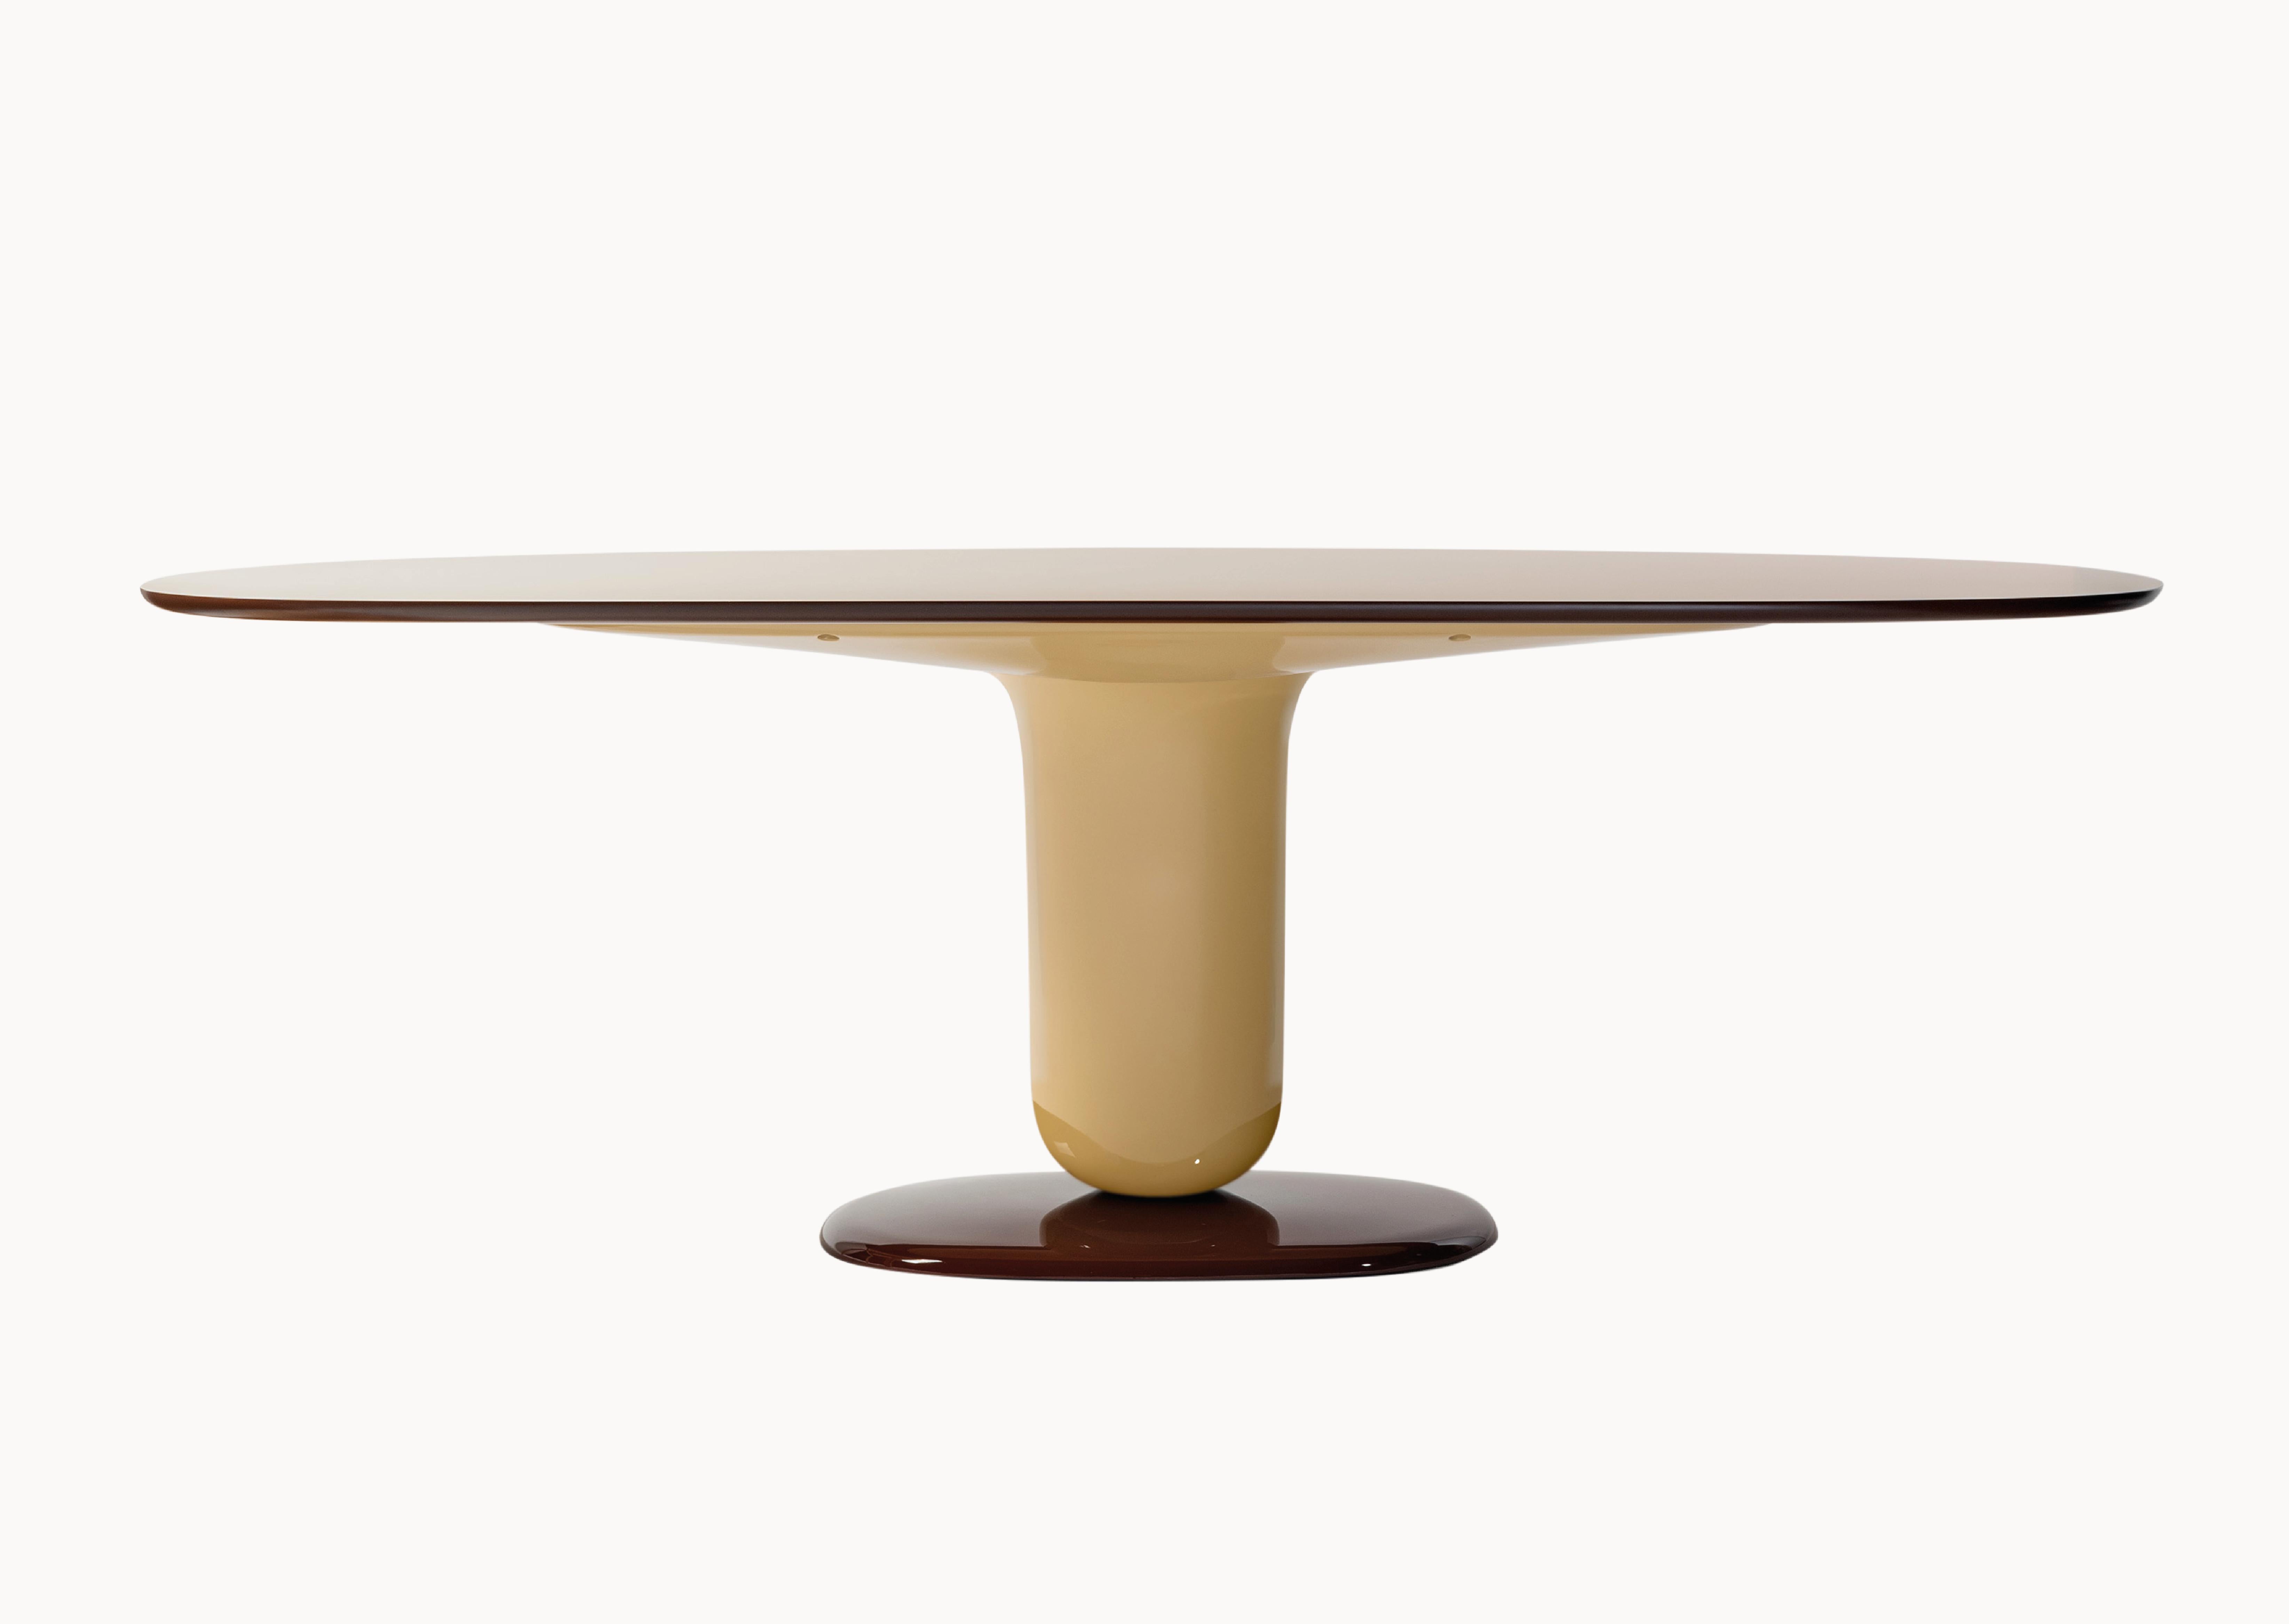 Spanish Contemporary Dining Table 'Explorer' by Jaime Hayon, 190 cm, Ivory, Top Fenix  For Sale